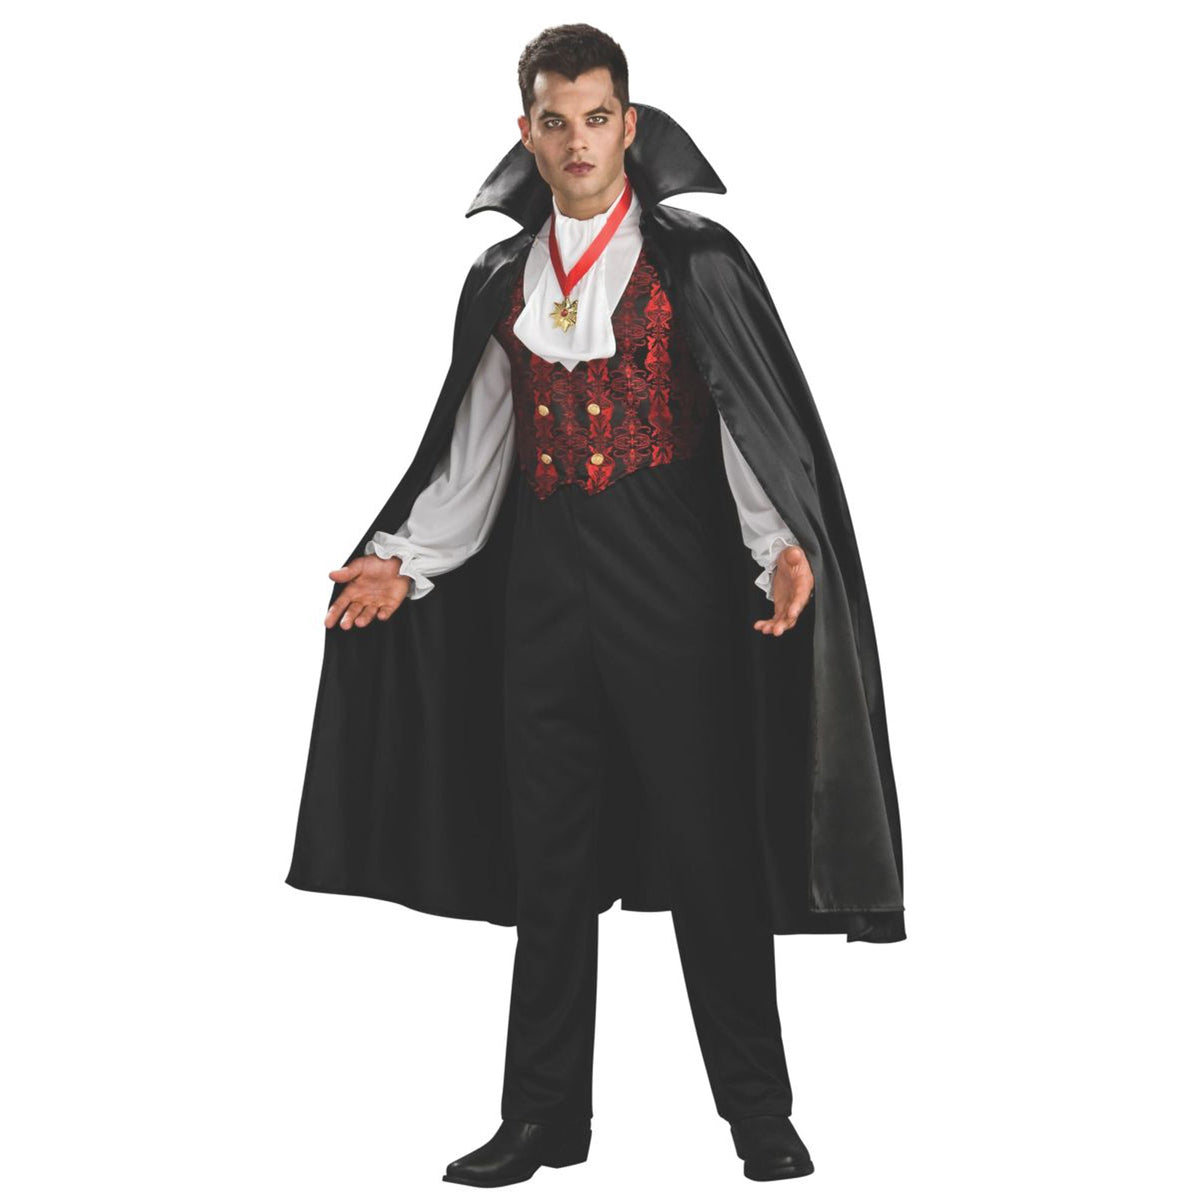 RUBIES II (Ruby Slipper Sales) Costumes transylvanian Vampire Costume for Adults 883028944101